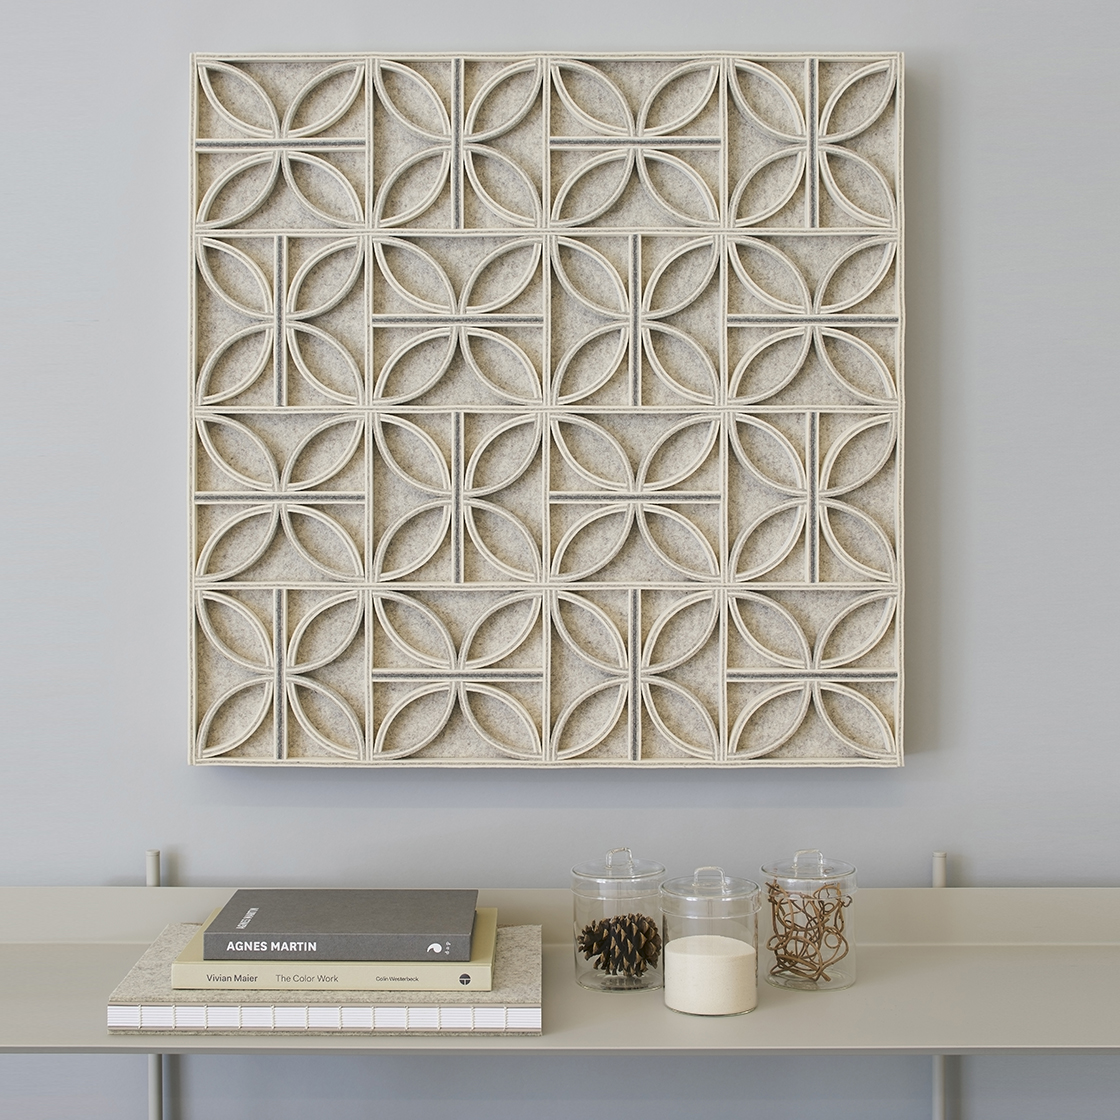 interior decor wall panel with intricate breeze block pattern in neutral colors made from merino wool